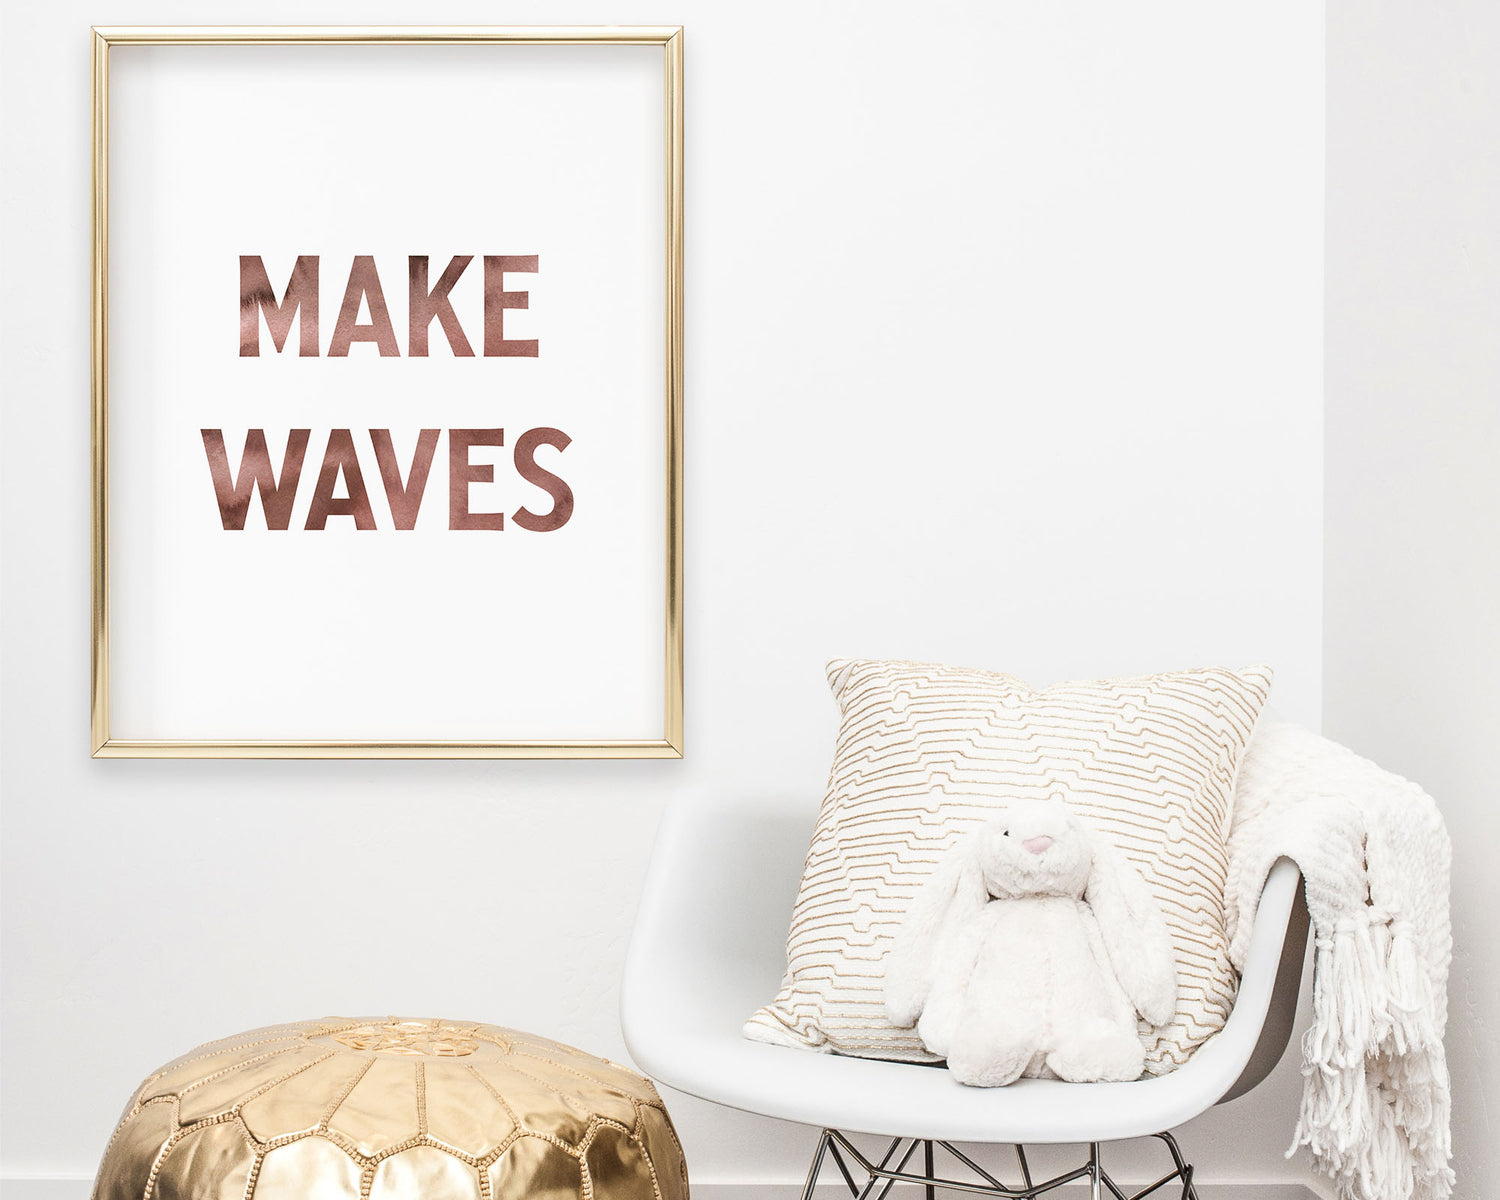 Watercolor Make Waves Printable Wall Art featuring red-brown watercolor letters. Perfect for Baby Boy Nautical Nursery Decor, Baby Girl Surf Nursery Wall Art, Nautical Kids Bedroom Decor or Children's Coastal Bathroom Wall Art.